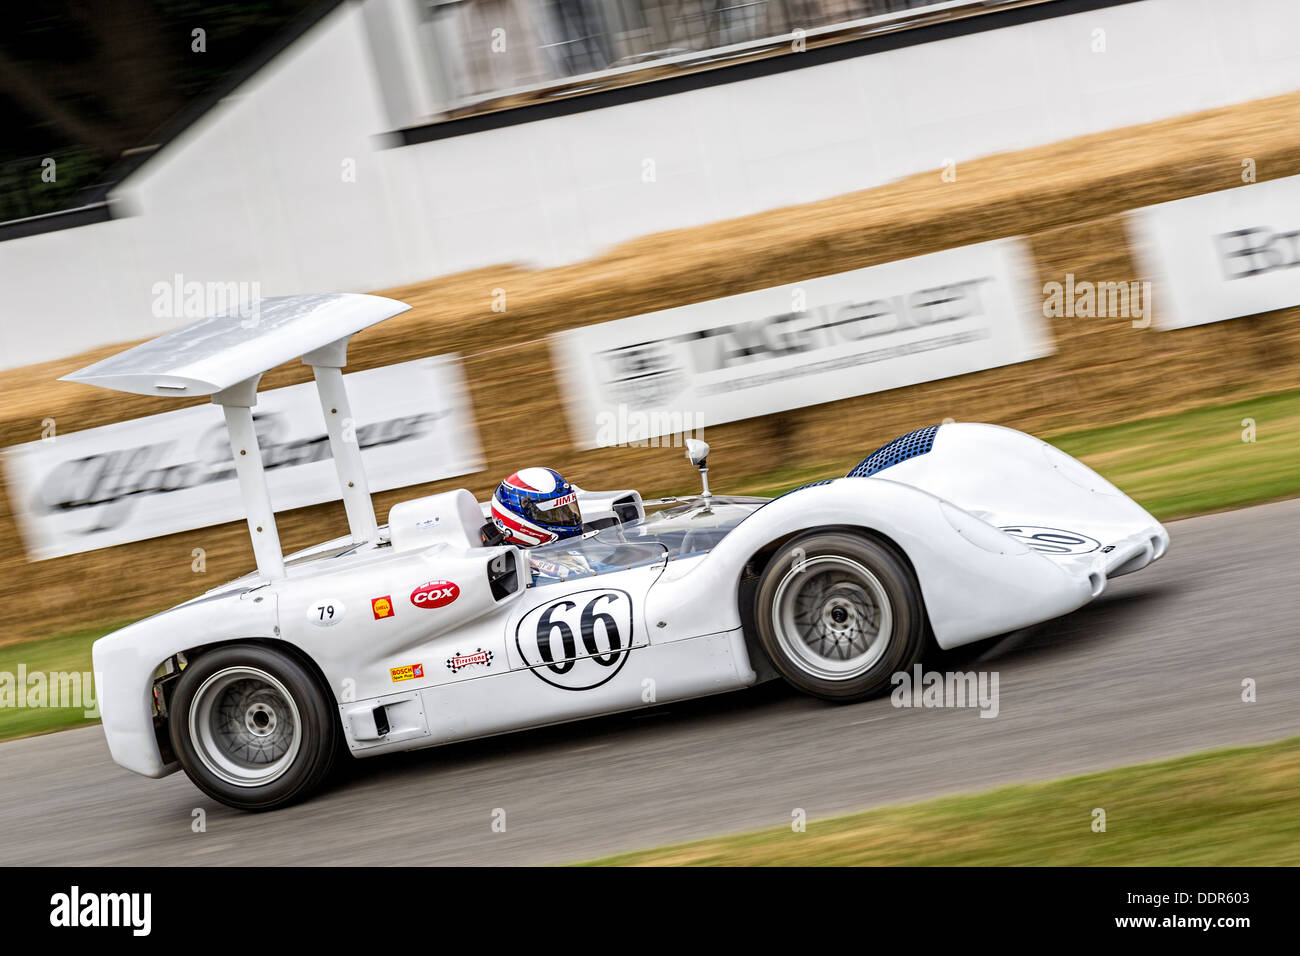 1966 Chaparral-Chevrolet 2E with driver Jim Hall at the 2013 Goodwood Festival of Speed, Sussex, UK Stock Photo